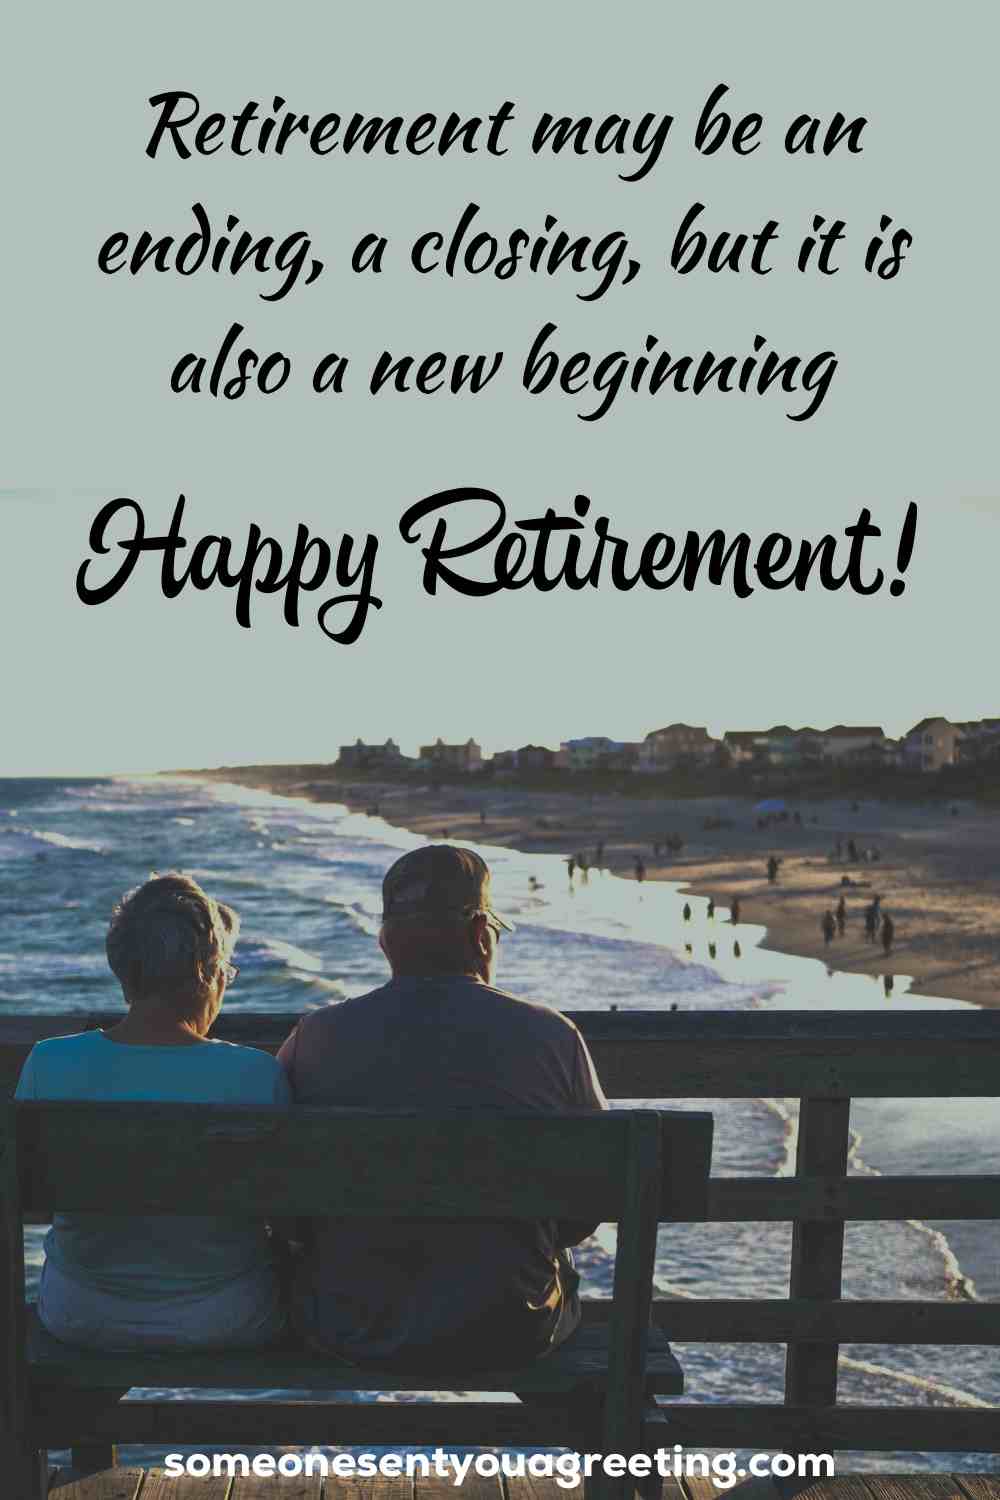 retirement wishes inspiring quote